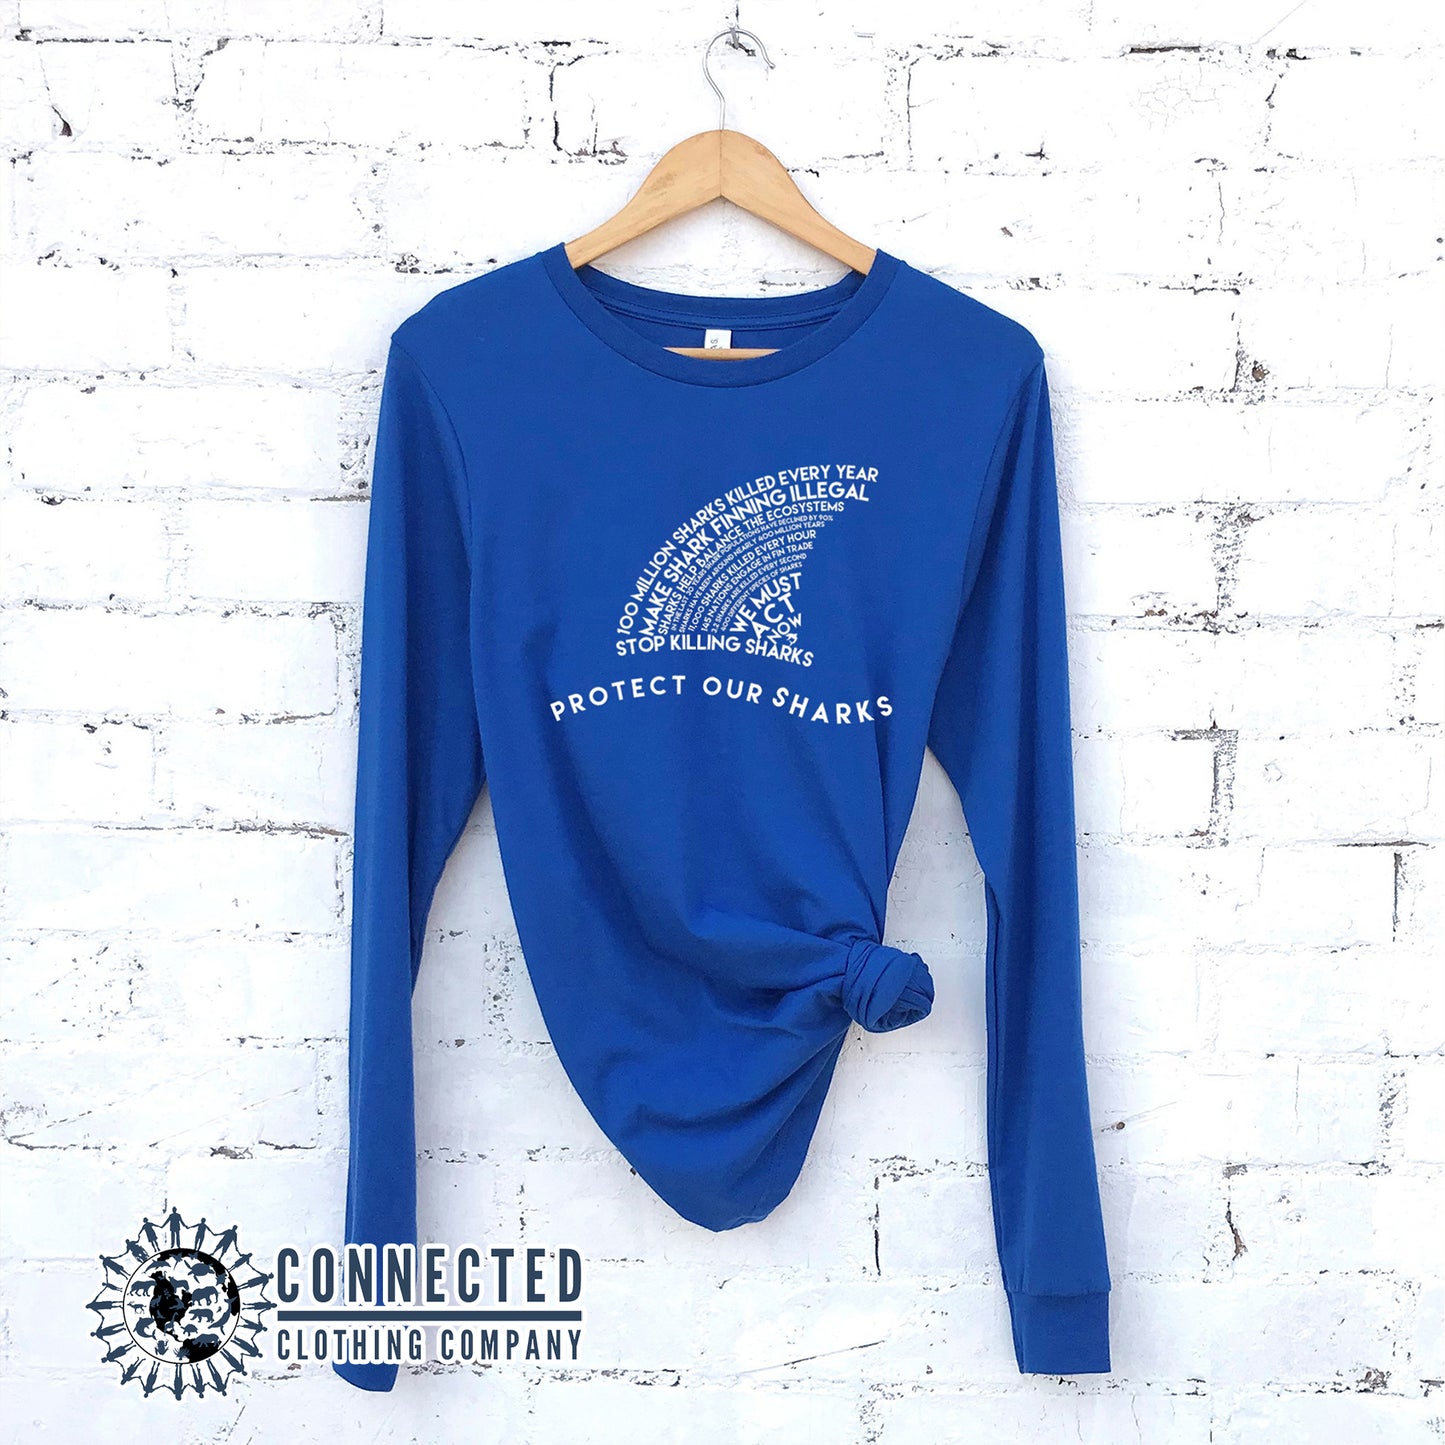 True Royal Blue Protect Our Sharks Long-Sleeve Tee - Connected Clothing Company - Ethically and Sustainably Made - 10% donated to Oceana shark conservation